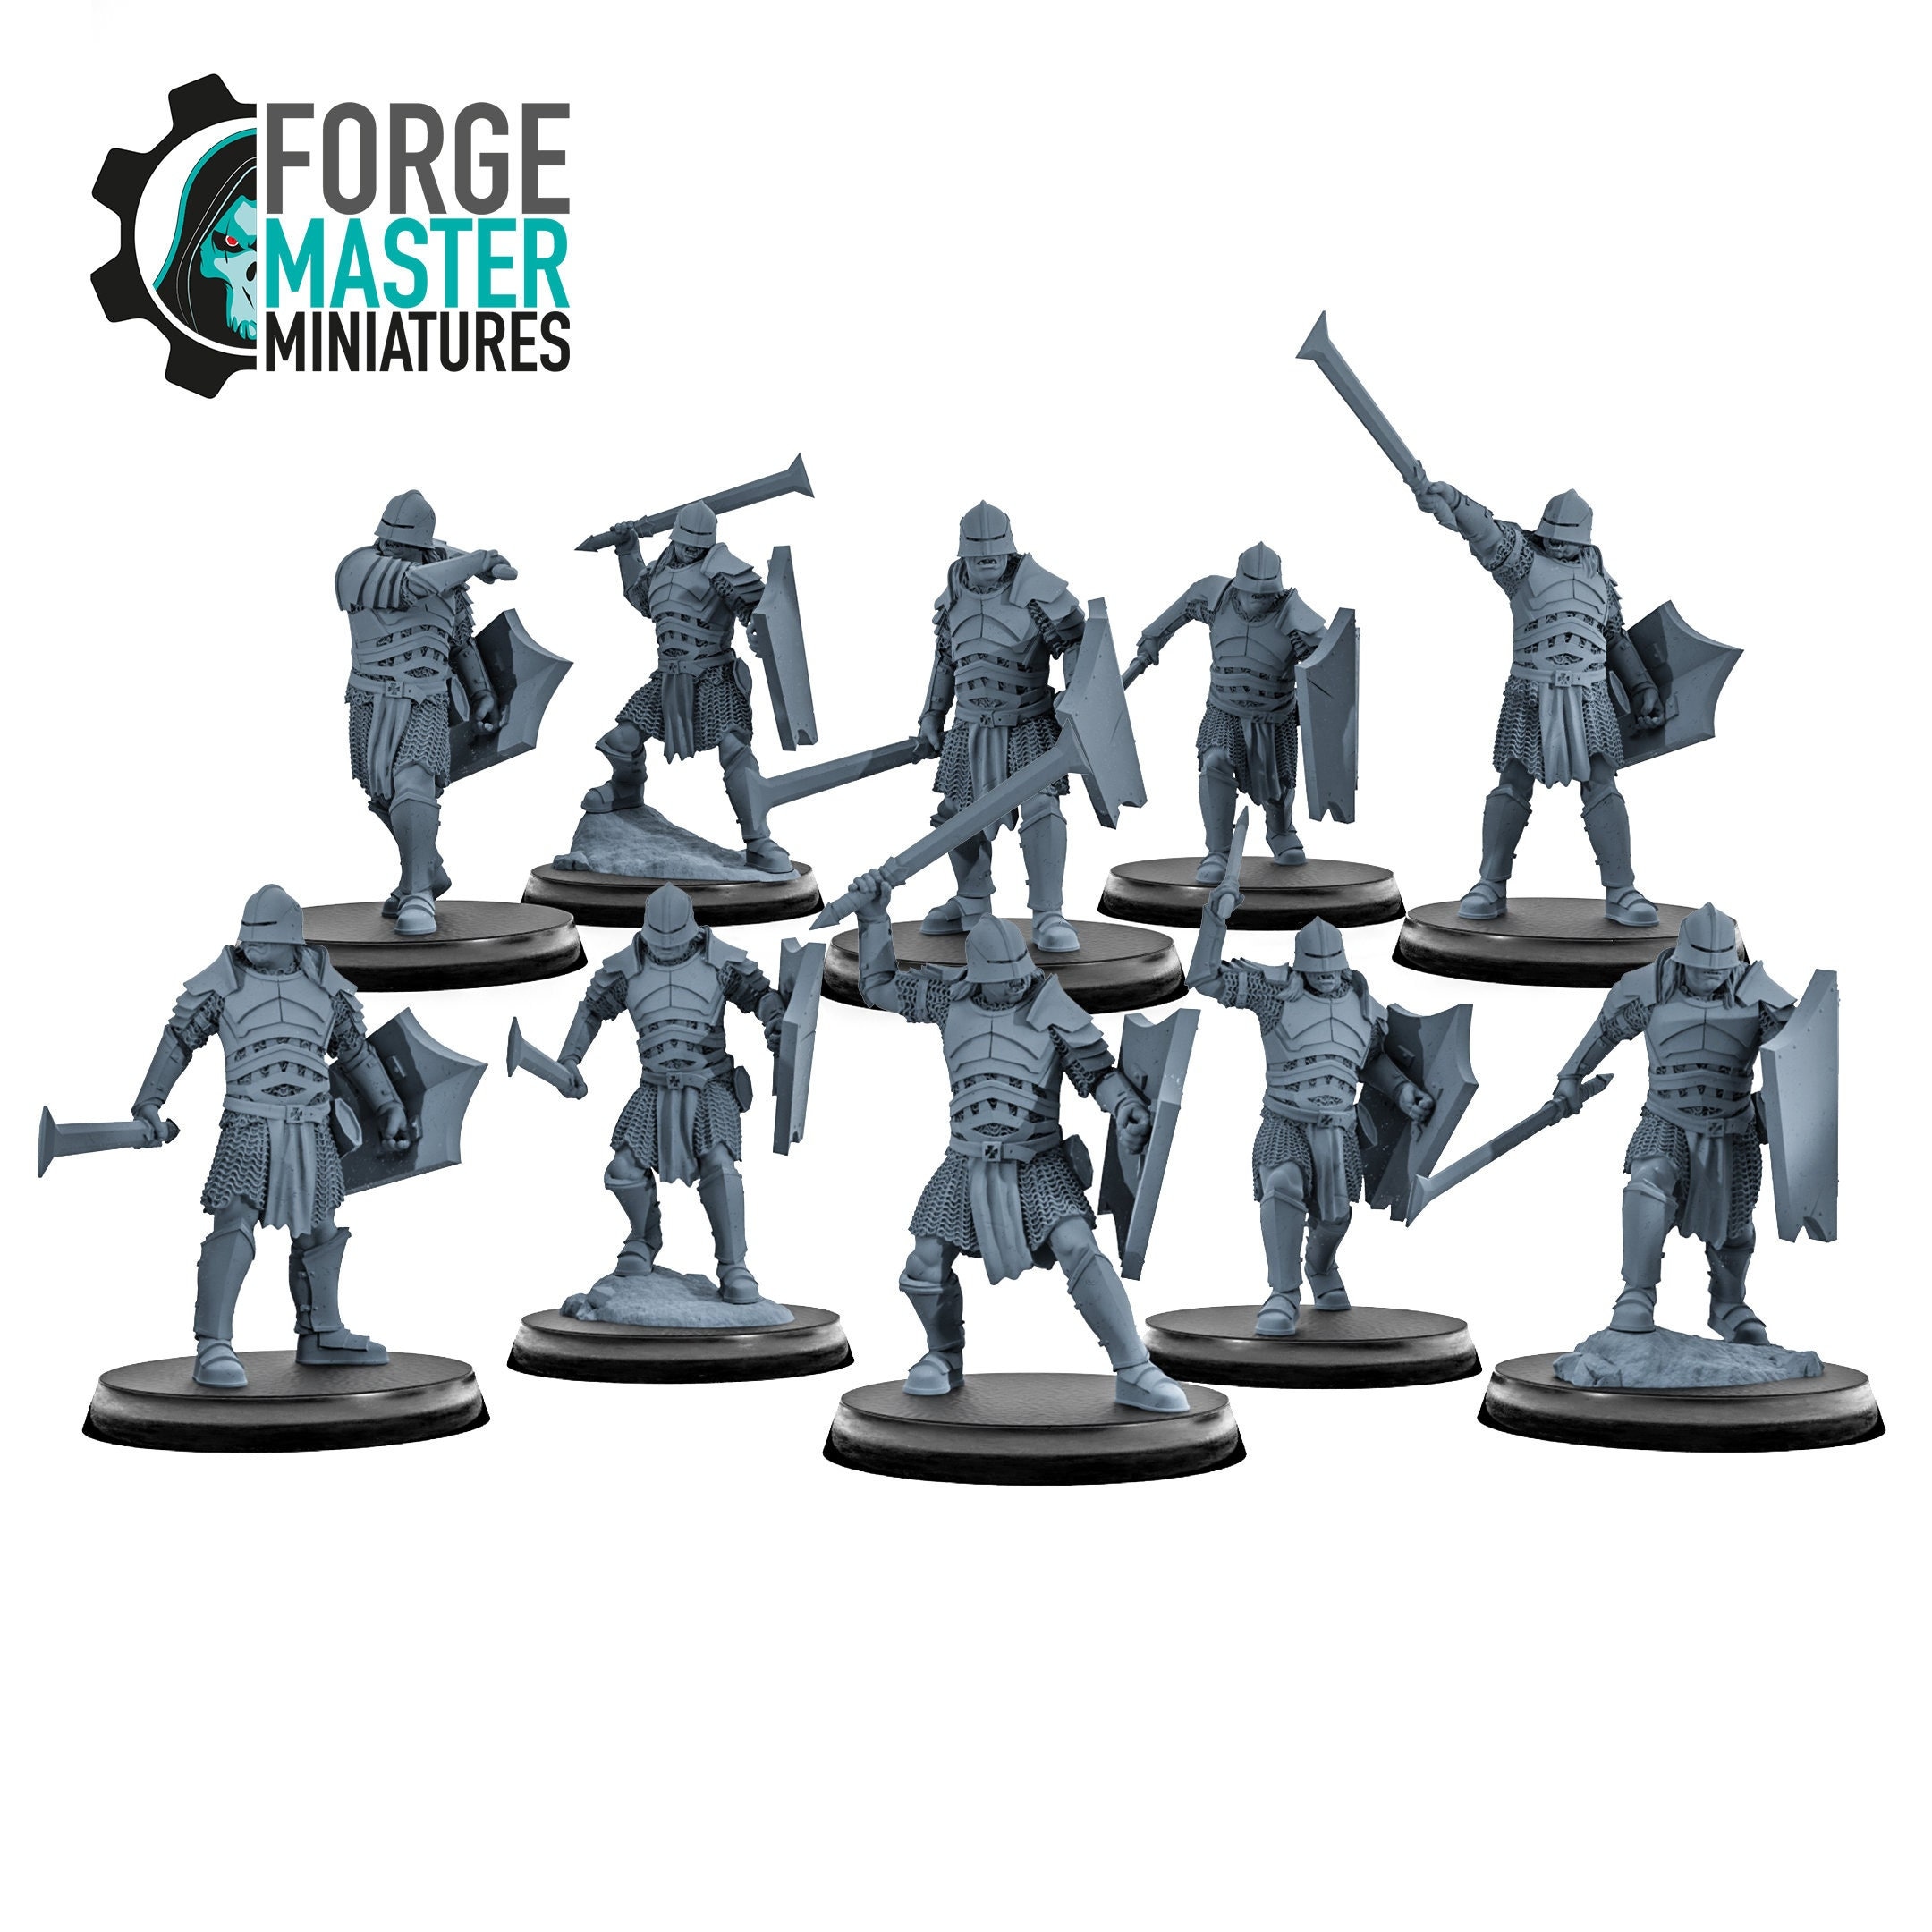 Blood Hand Orc Warriors wargaming mniatures designed by Davale Games 3D printed by Forgemaster Miniatures